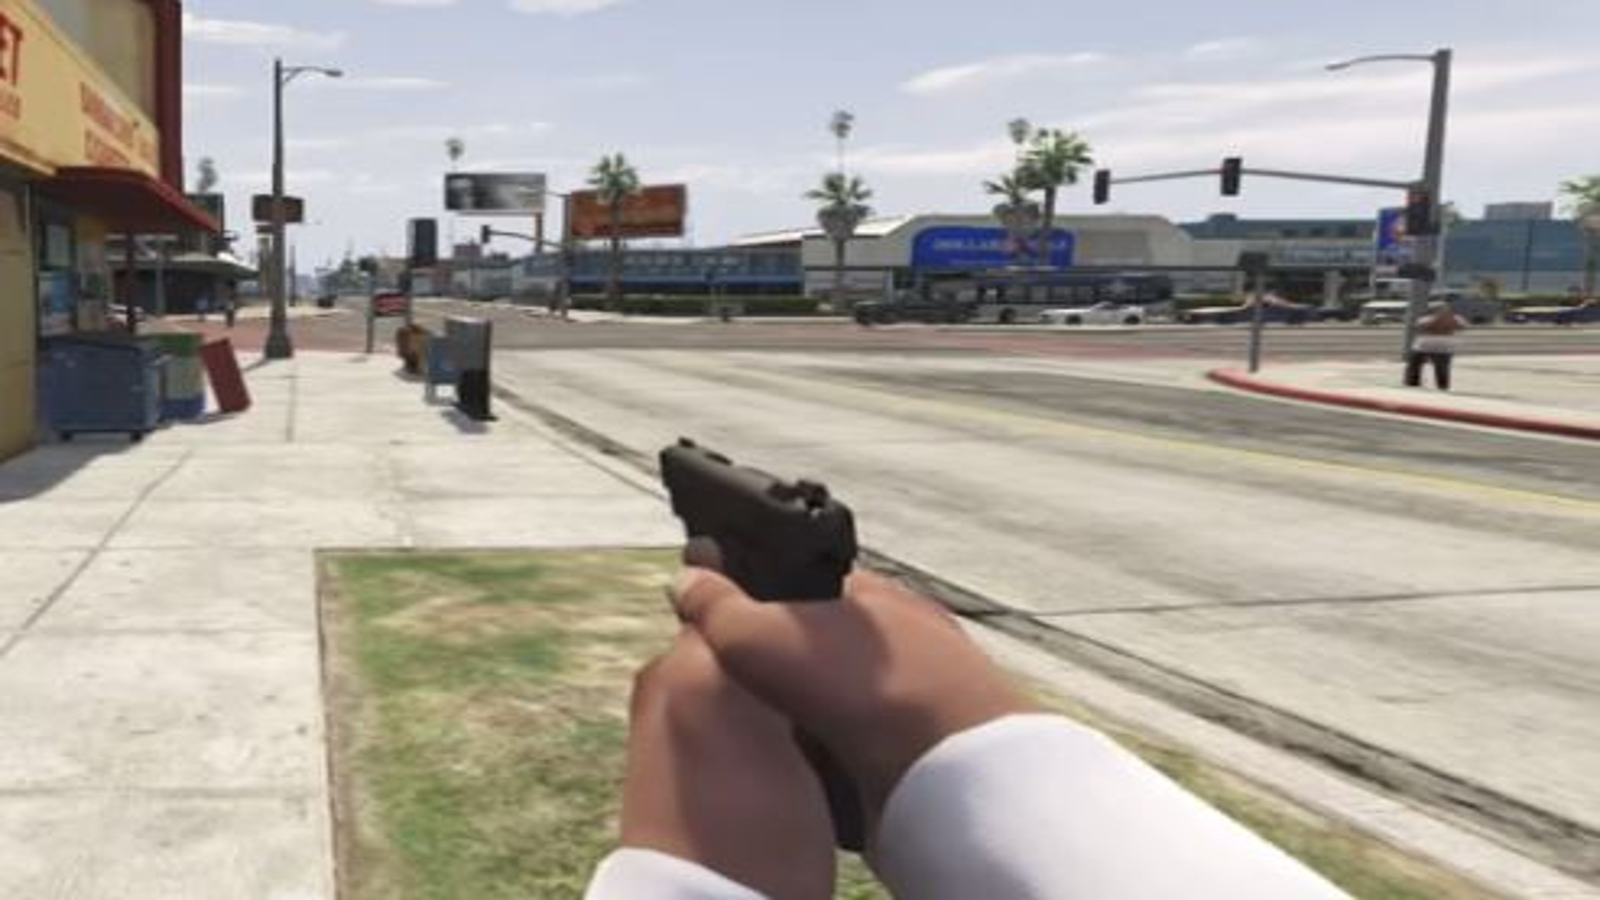 How to play GTA 5 for Xbox 360, and save the game - Quora